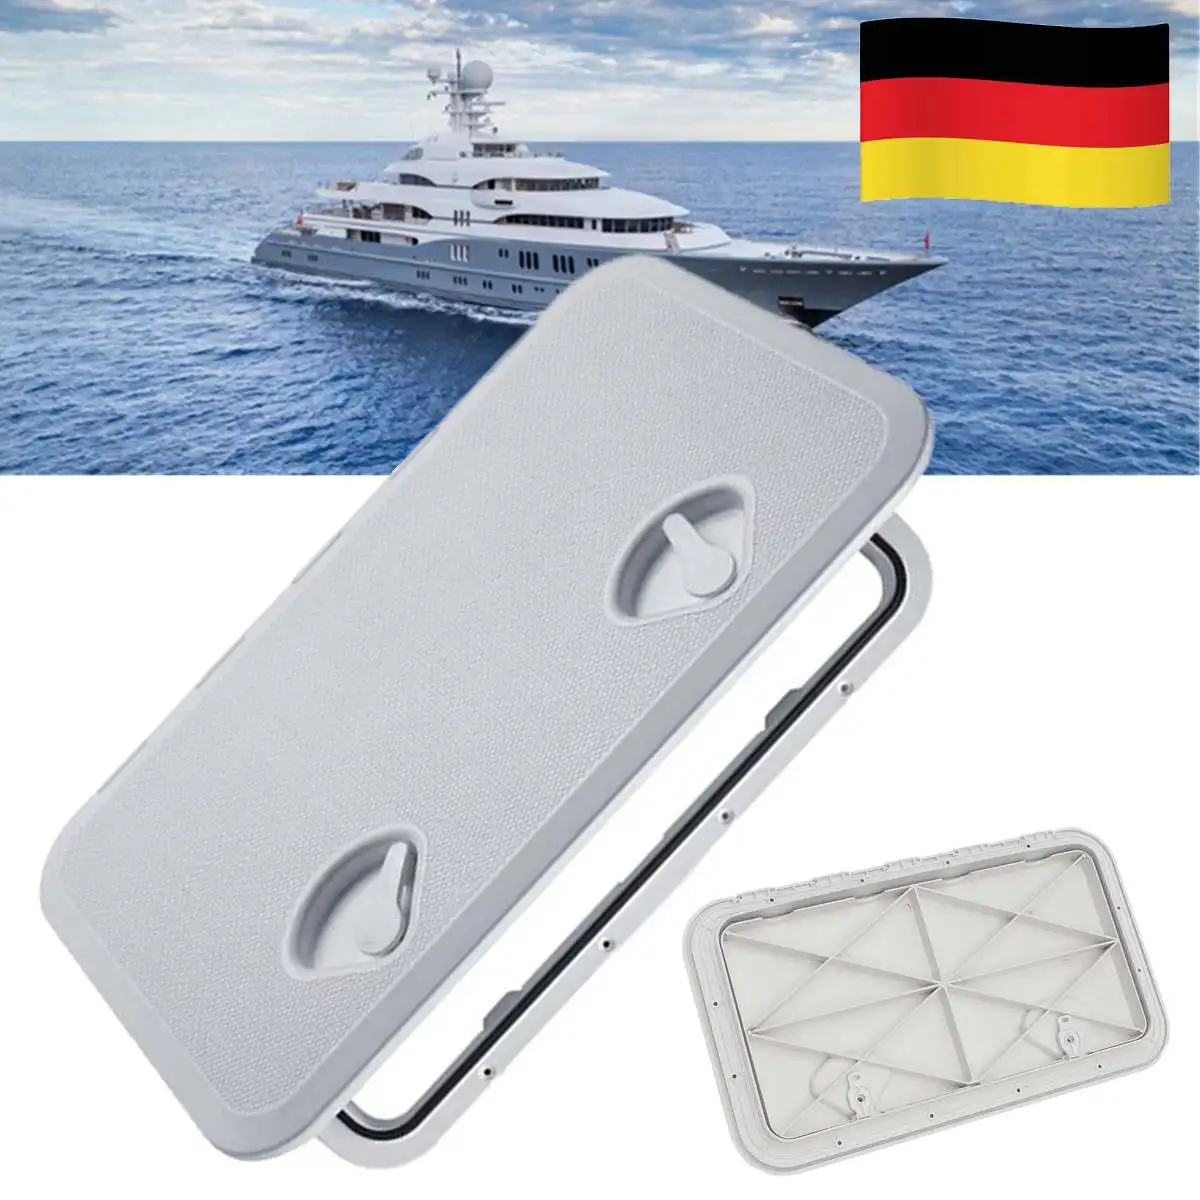 

606x353mm Hatch Plate White Inspection Plastic Watertight Marine Boat Caravan Deck Compartment Access Yacht Cover RV Ship Part